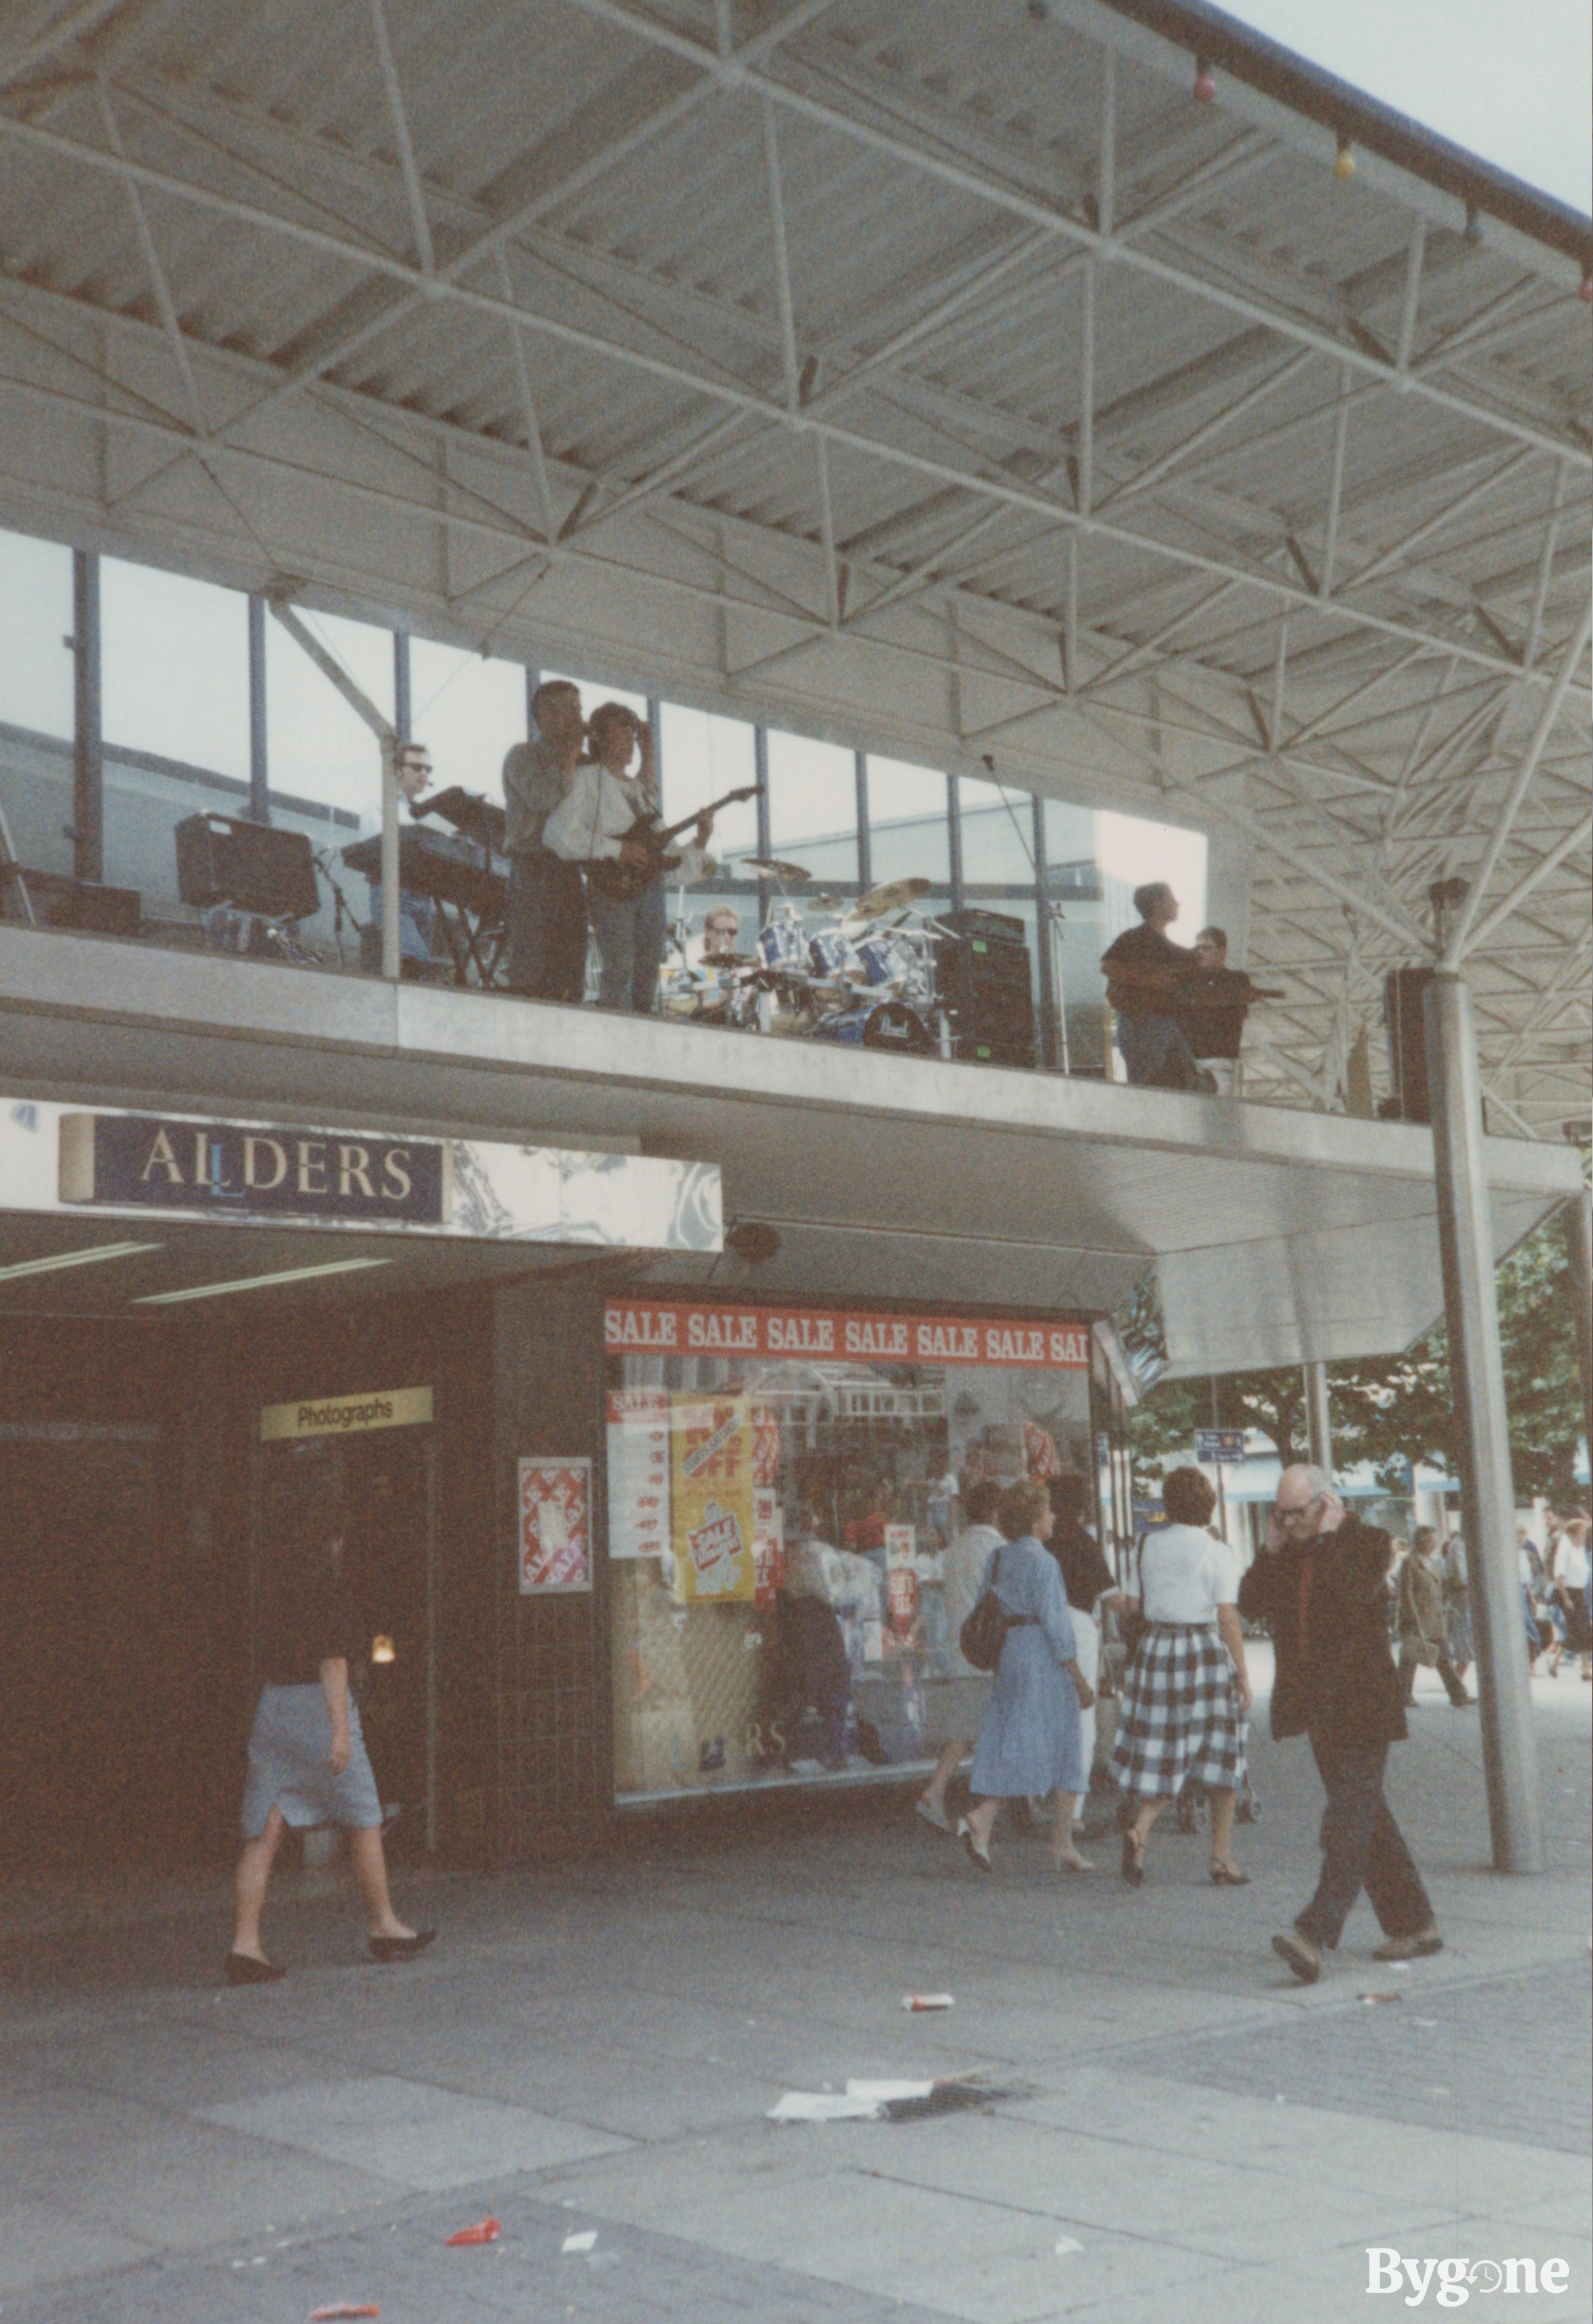 Commercial Road 1989 - Band playing on top of Allders